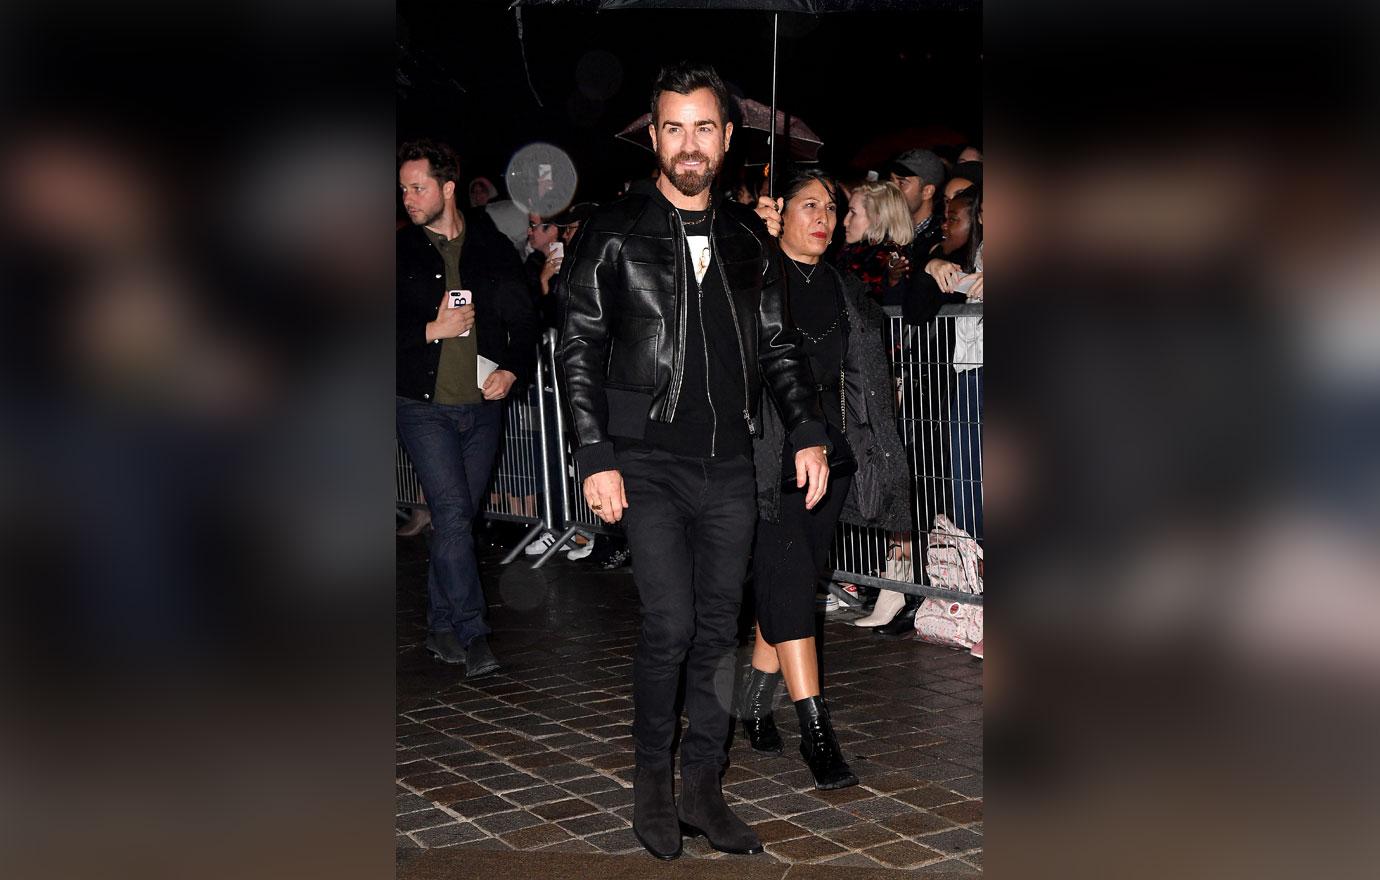 Nina Dobrev, Justin Theroux, & More Celebs Attend Louis Vuitton's